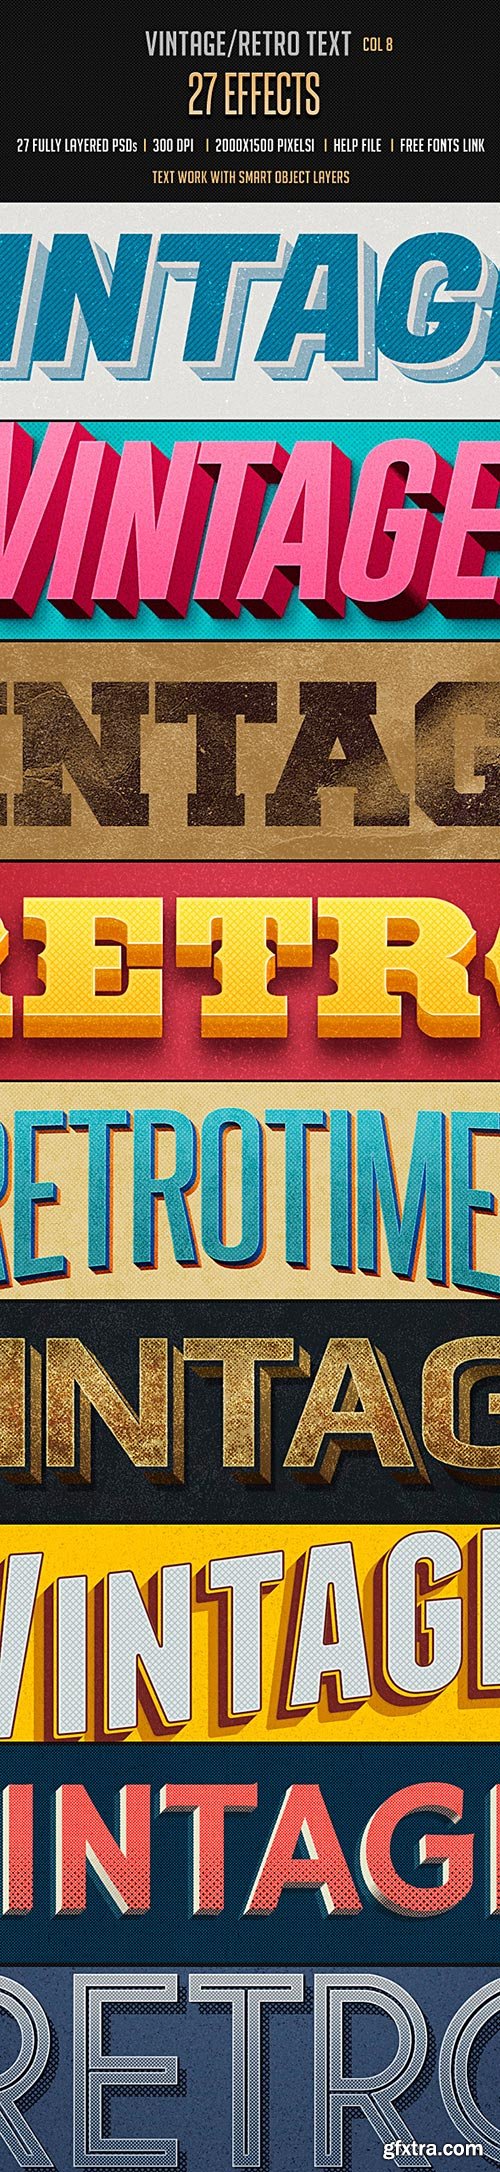 GraphicRiver - Vintage Retro Text Effects Col 8